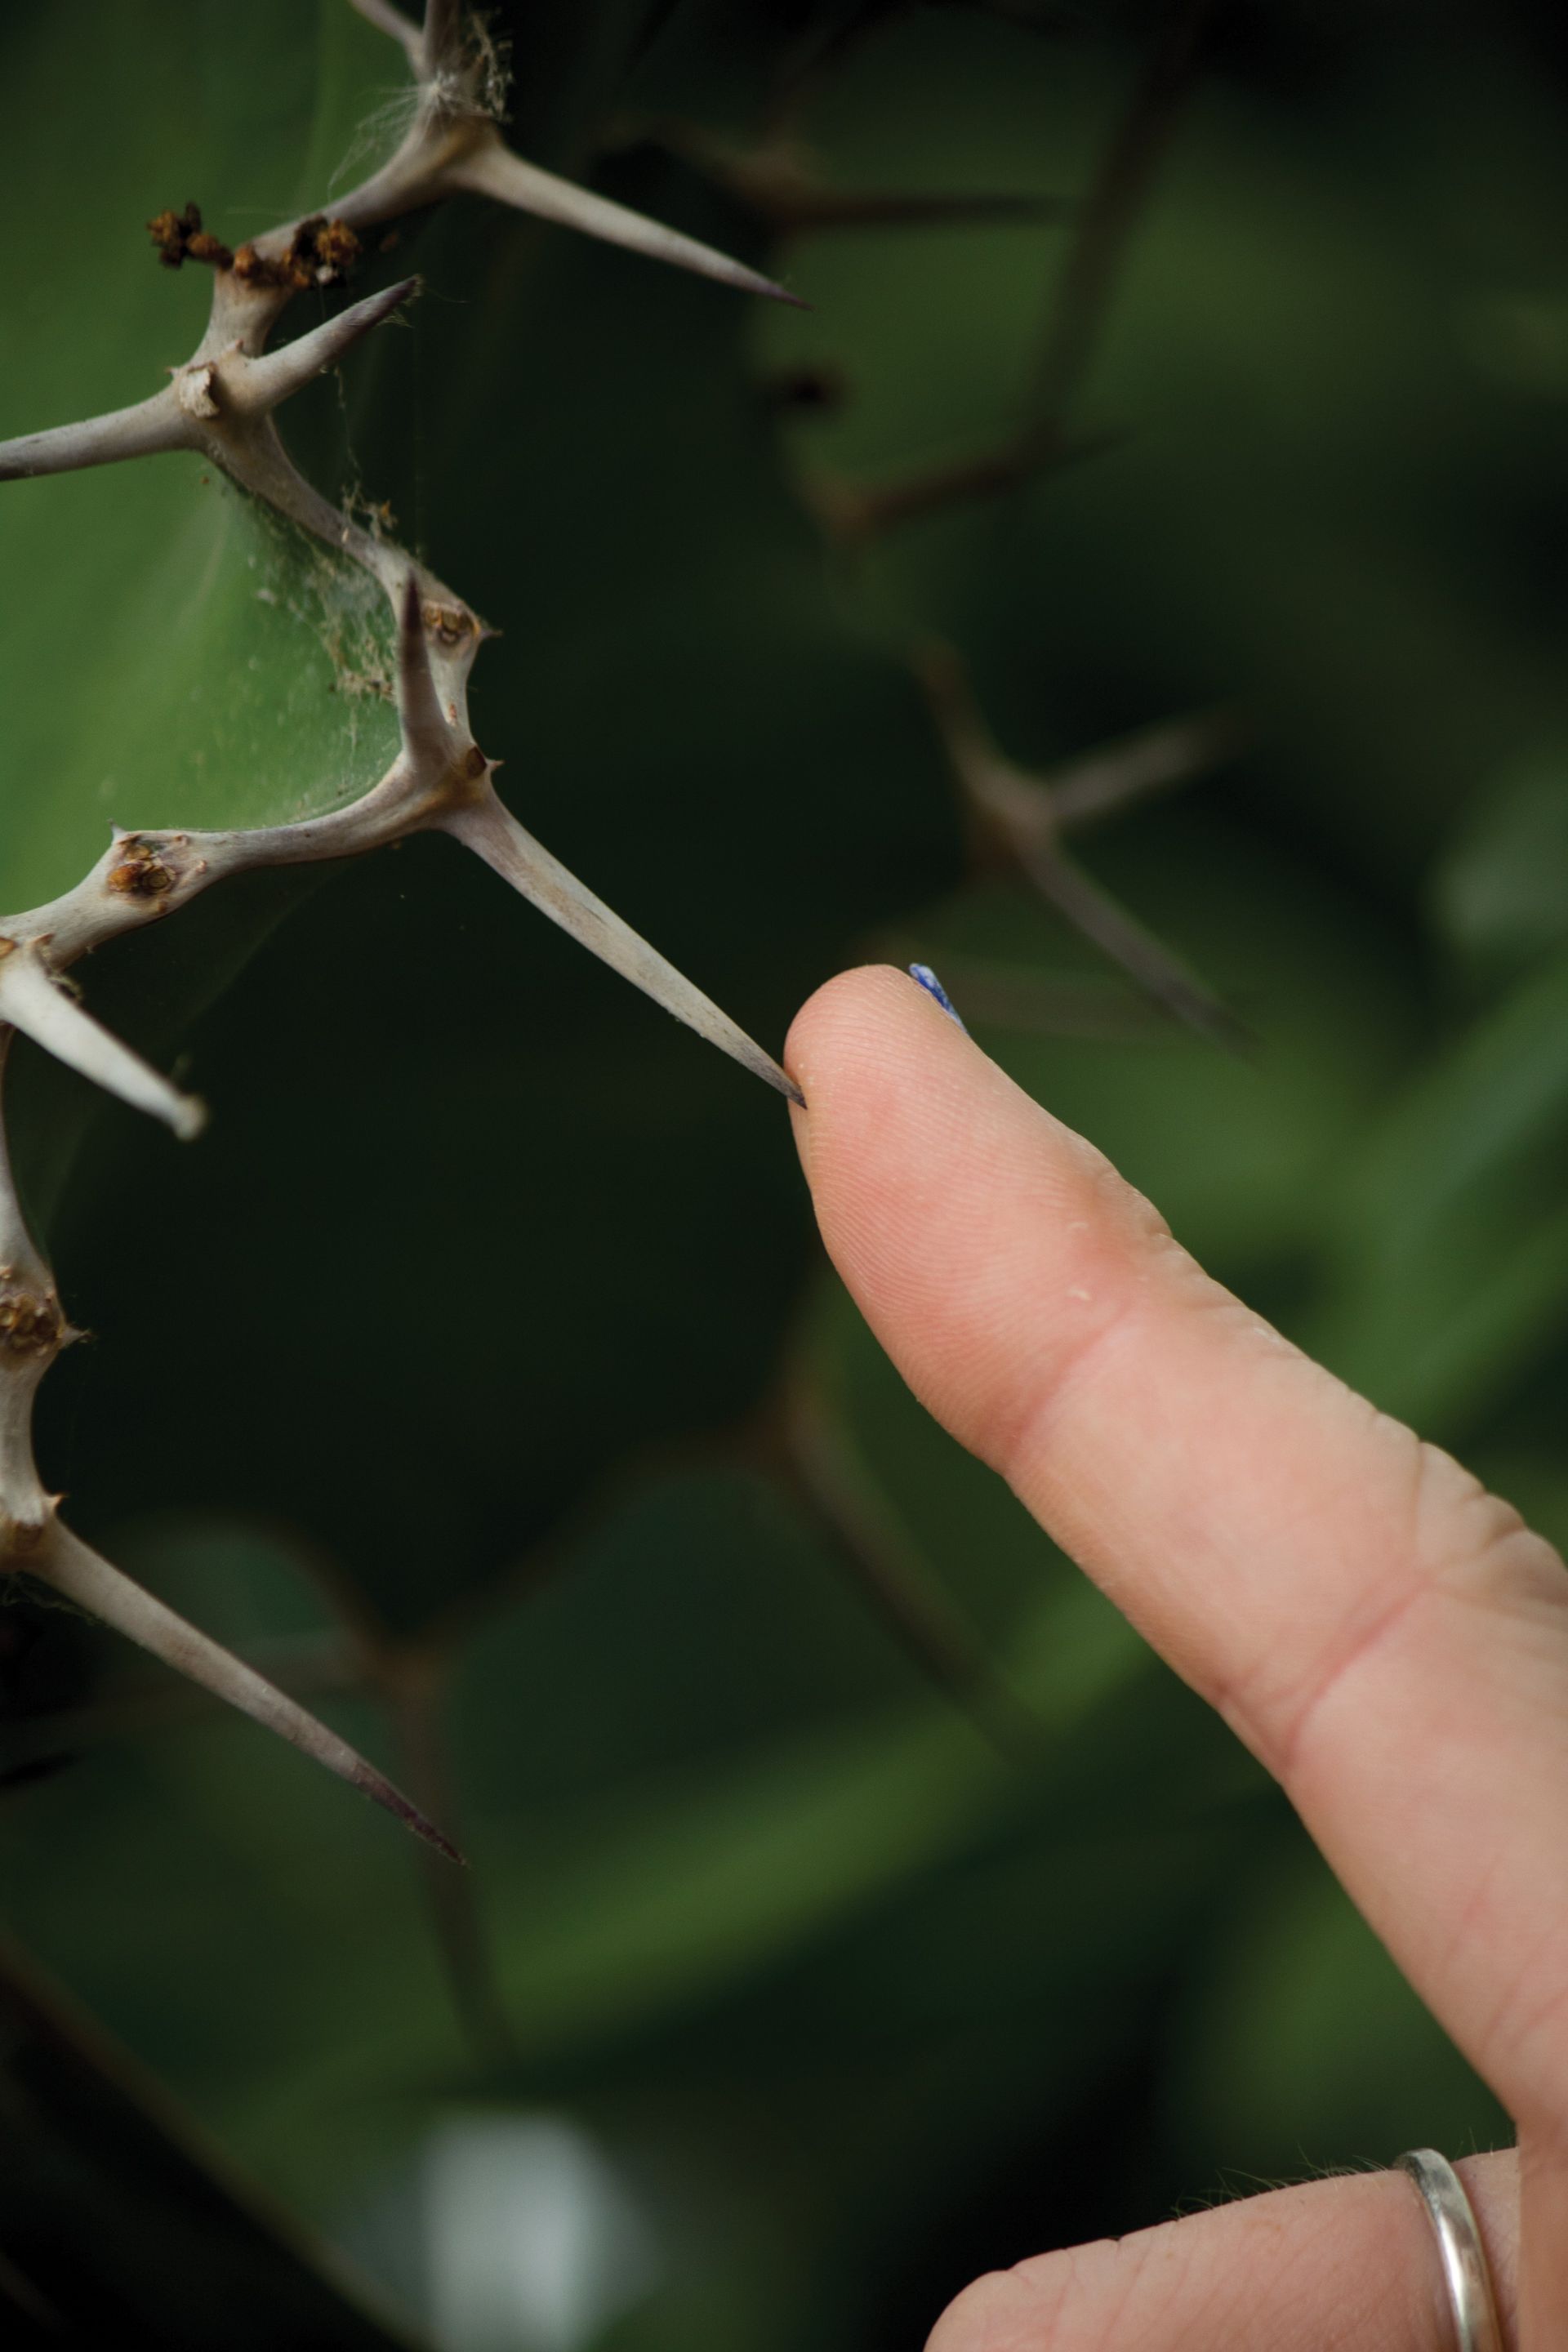 A finger touching a thorn on a plant.